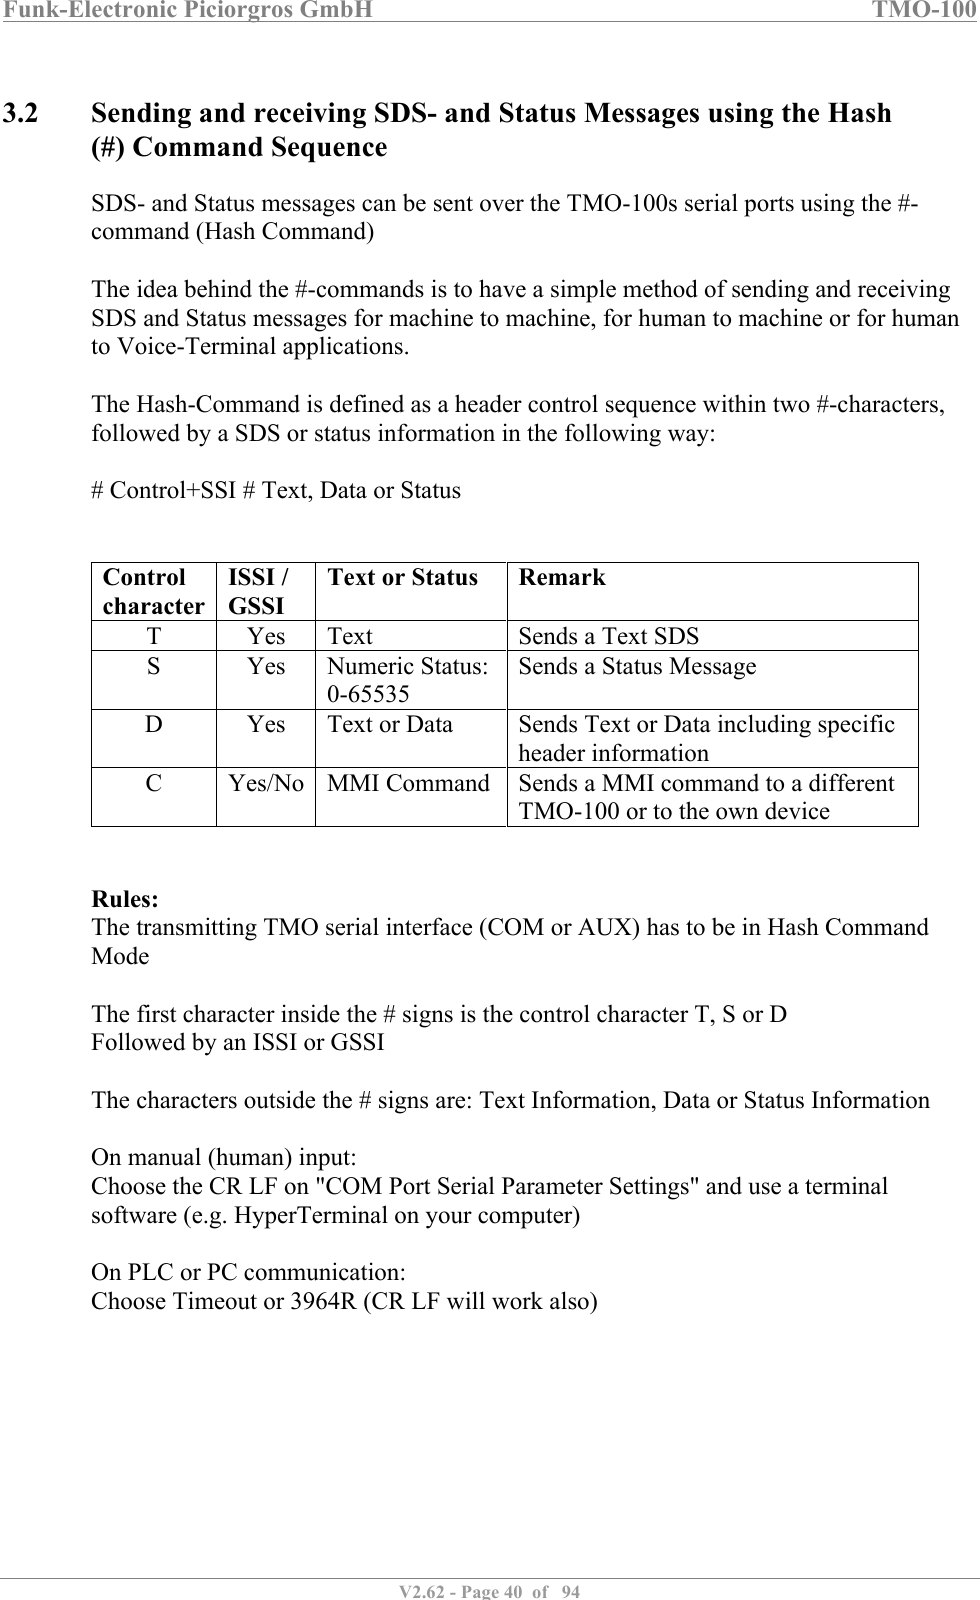 Funk-Electronic Piciorgros GmbH   TMO-100   V2.62 - Page 40  of   94   3.2 Sending and receiving SDS- and Status Messages using the Hash (#) Command Sequence SDS- and Status messages can be sent over the TMO-100s serial ports using the #-command (Hash Command)  The idea behind the #-commands is to have a simple method of sending and receiving SDS and Status messages for machine to machine, for human to machine or for human to Voice-Terminal applications.  The Hash-Command is defined as a header control sequence within two #-characters, followed by a SDS or status information in the following way:  # Control+SSI # Text, Data or Status   Control  character ISSI / GSSI Text or Status Remark T Yes Text Sends a Text SDS S Yes Numeric Status: 0-65535 Sends a Status Message D Yes Text or Data Sends Text or Data including specific header information C Yes/No MMI Command Sends a MMI command to a different TMO-100 or to the own device   Rules: The transmitting TMO serial interface (COM or AUX) has to be in Hash Command Mode  The first character inside the # signs is the control character T, S or D Followed by an ISSI or GSSI  The characters outside the # signs are: Text Information, Data or Status Information  On manual (human) input:  Choose the CR LF on &quot;COM Port Serial Parameter Settings&quot; and use a terminal software (e.g. HyperTerminal on your computer)  On PLC or PC communication:  Choose Timeout or 3964R (CR LF will work also)  